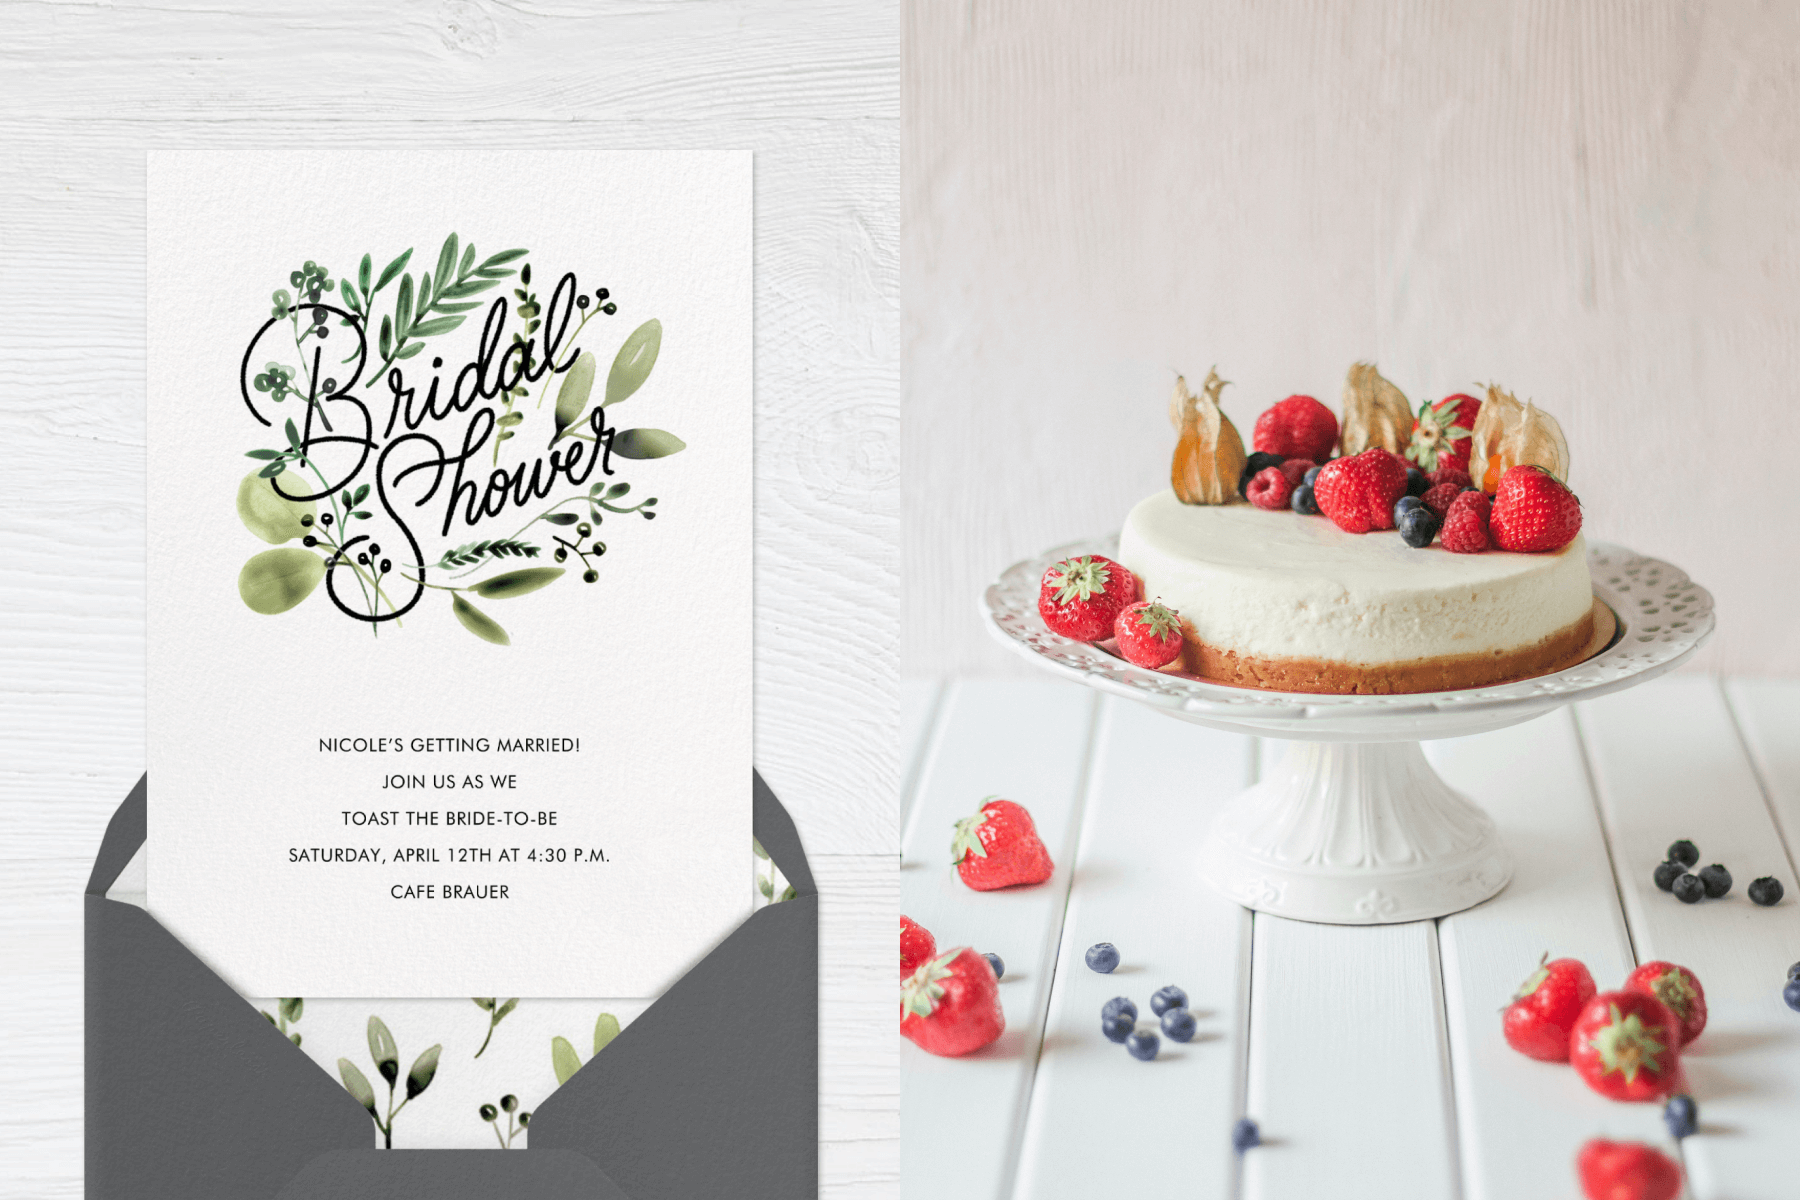 Left: A white bridal shower invitation with illustrated green leaves. Right: A small cake with berries on a cake stand.